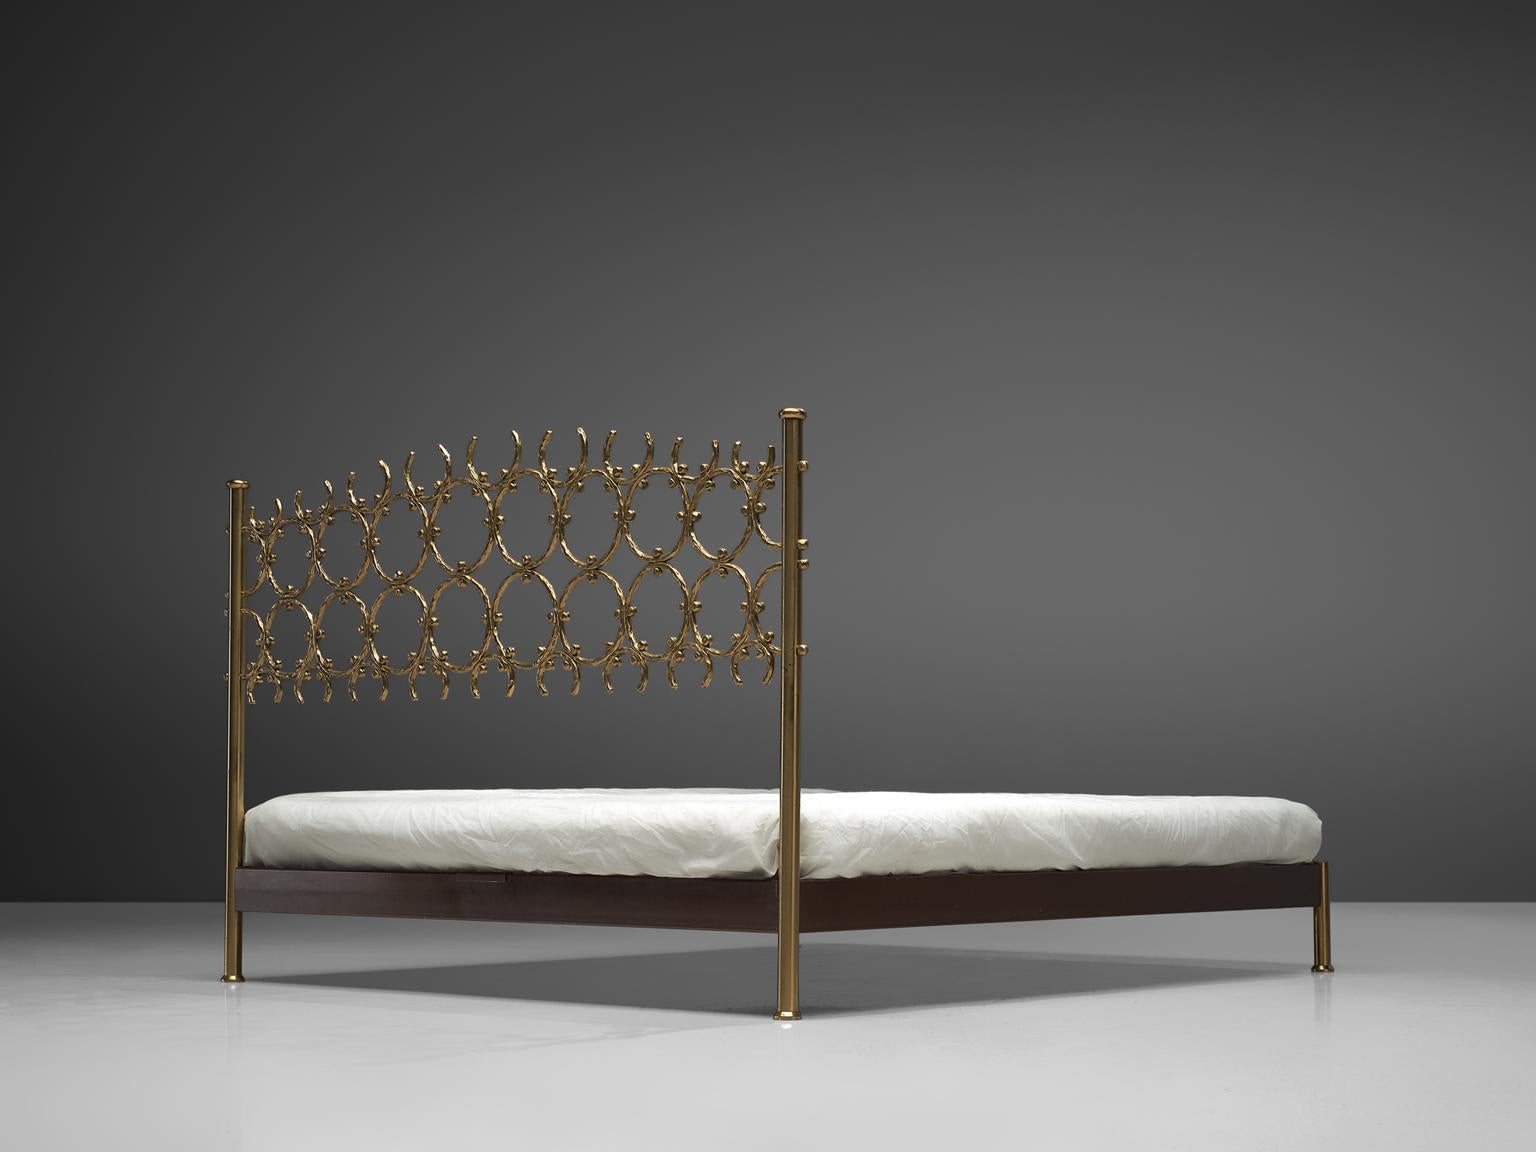 Osvaldo Borsani and Arnaldo Pomodoro, queen size bed, brass and steel, Italy, circa 1960.

A rare and elegant bed with headboard from the Italian designer Osvaldo Borsani and sculptor Arnaldo Pomodoro. Between 1958 and 1962, Borsani and Pomodoro